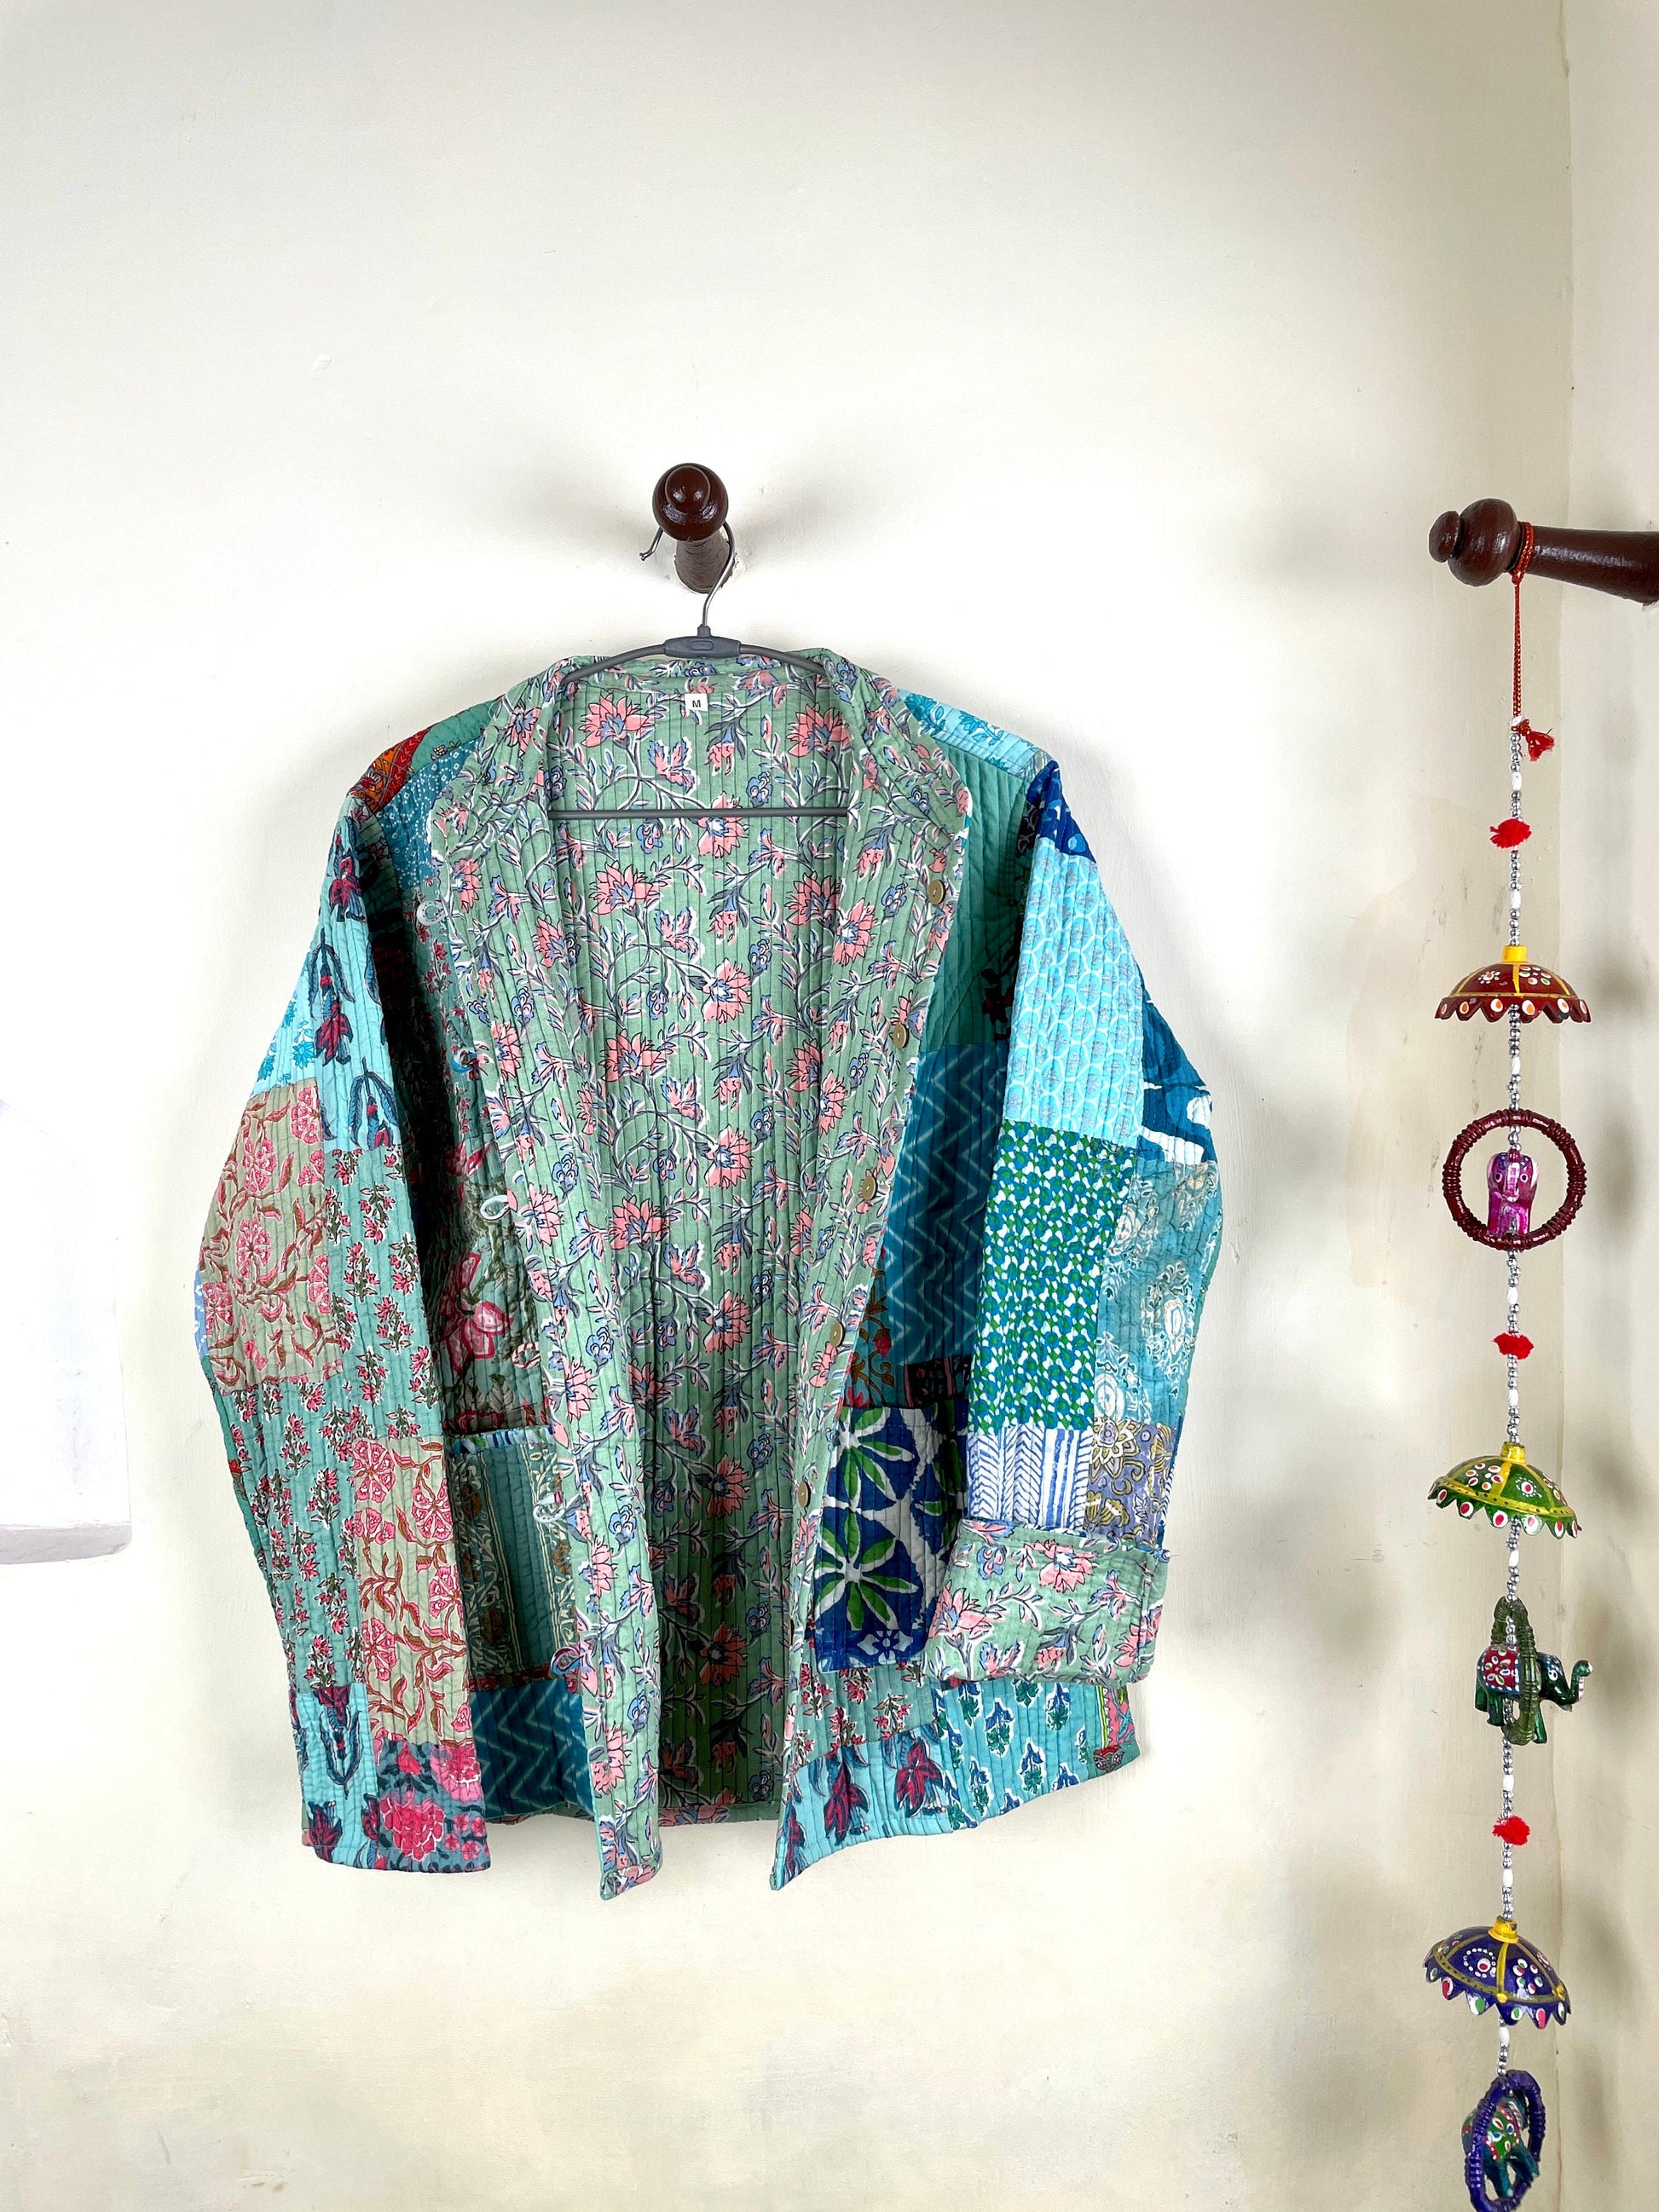 Indian Handmade Quilted Cotton Fabric Jacket Stylish Turquoise Patchwork Women's Coat, Reversible Waistcoat for Her